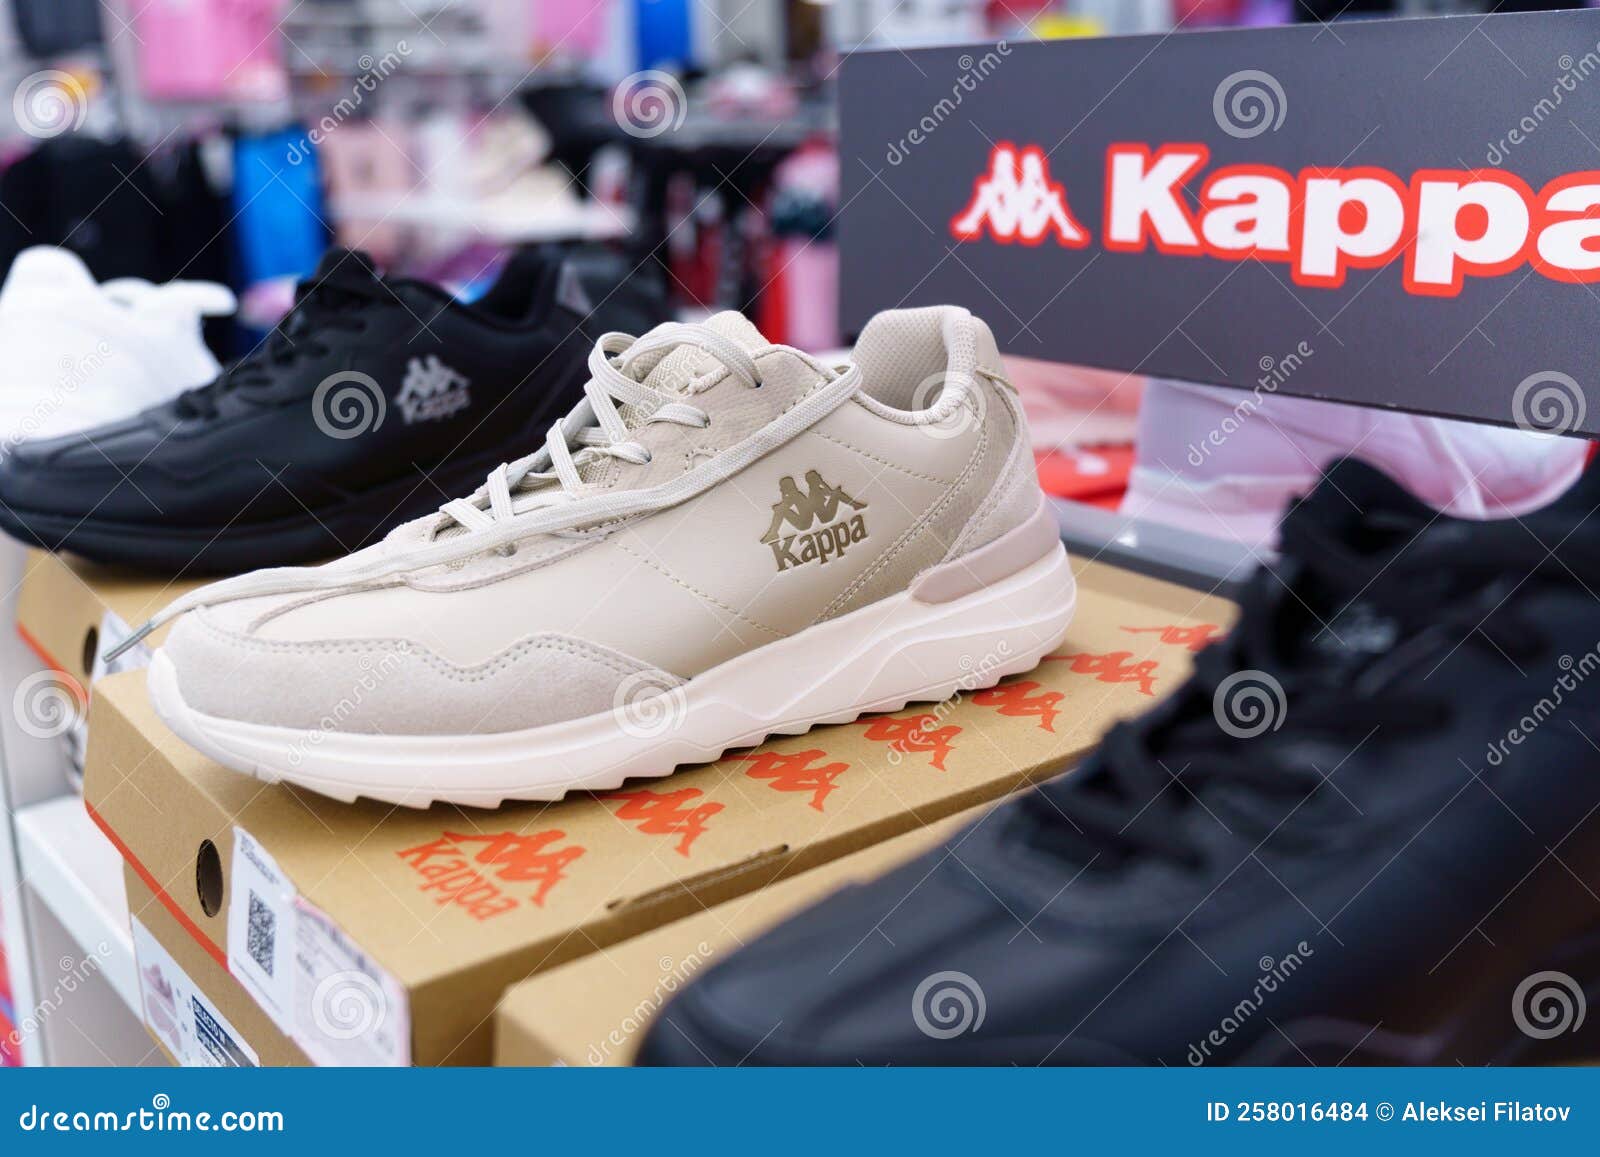 fjerkræ bison Settle Kappa Store Stock Photos - Free & Royalty-Free Stock Photos from Dreamstime